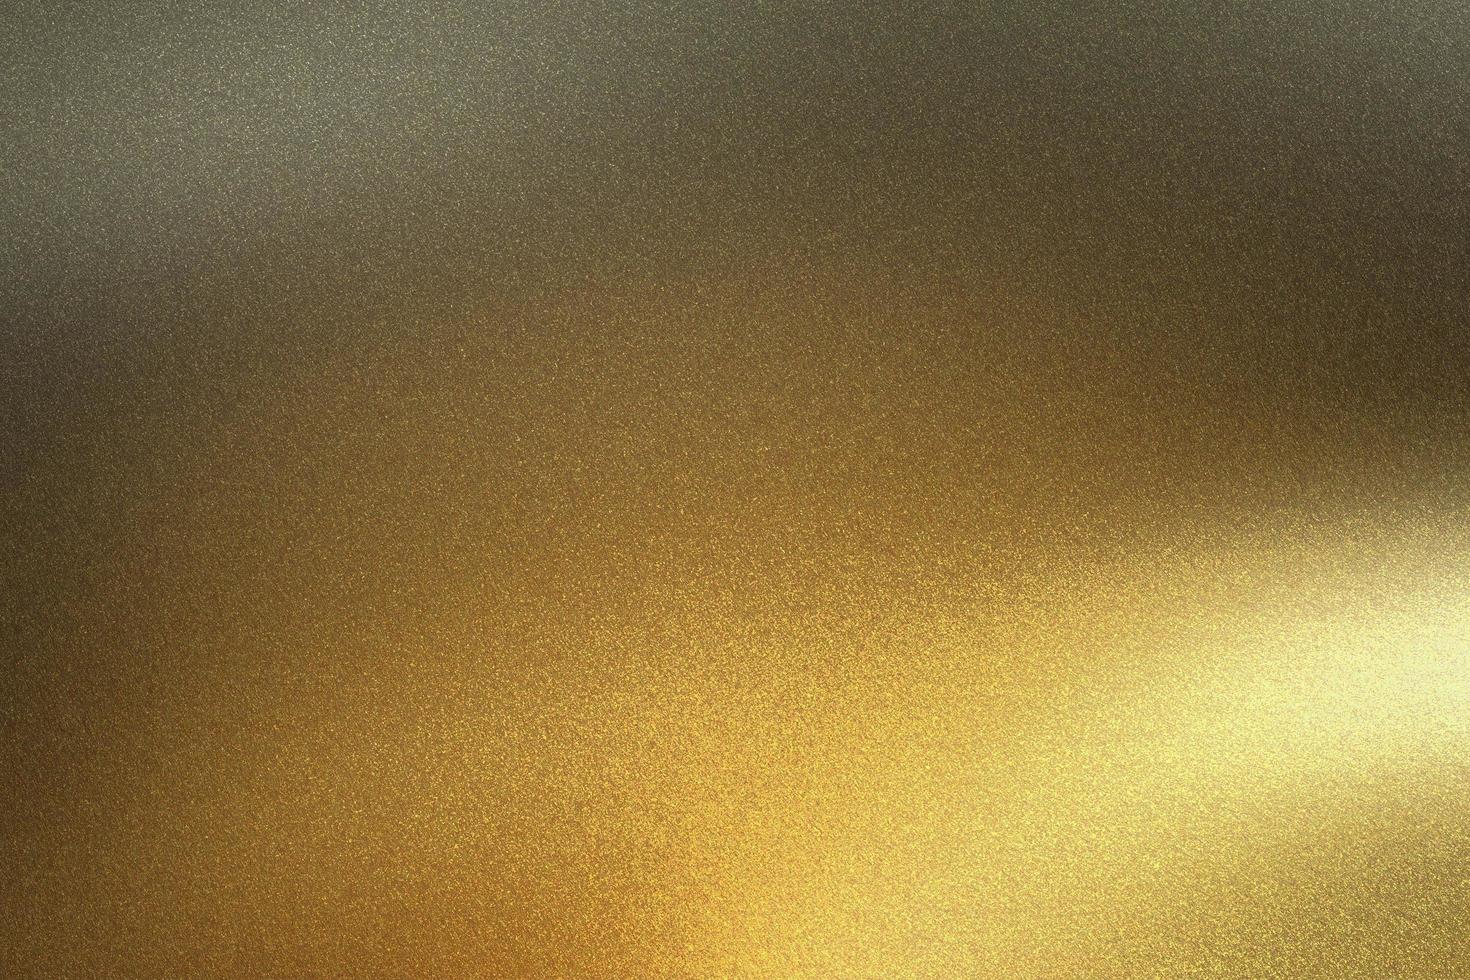 Light shining on golden metal foil in dark room, abstract texture background photo